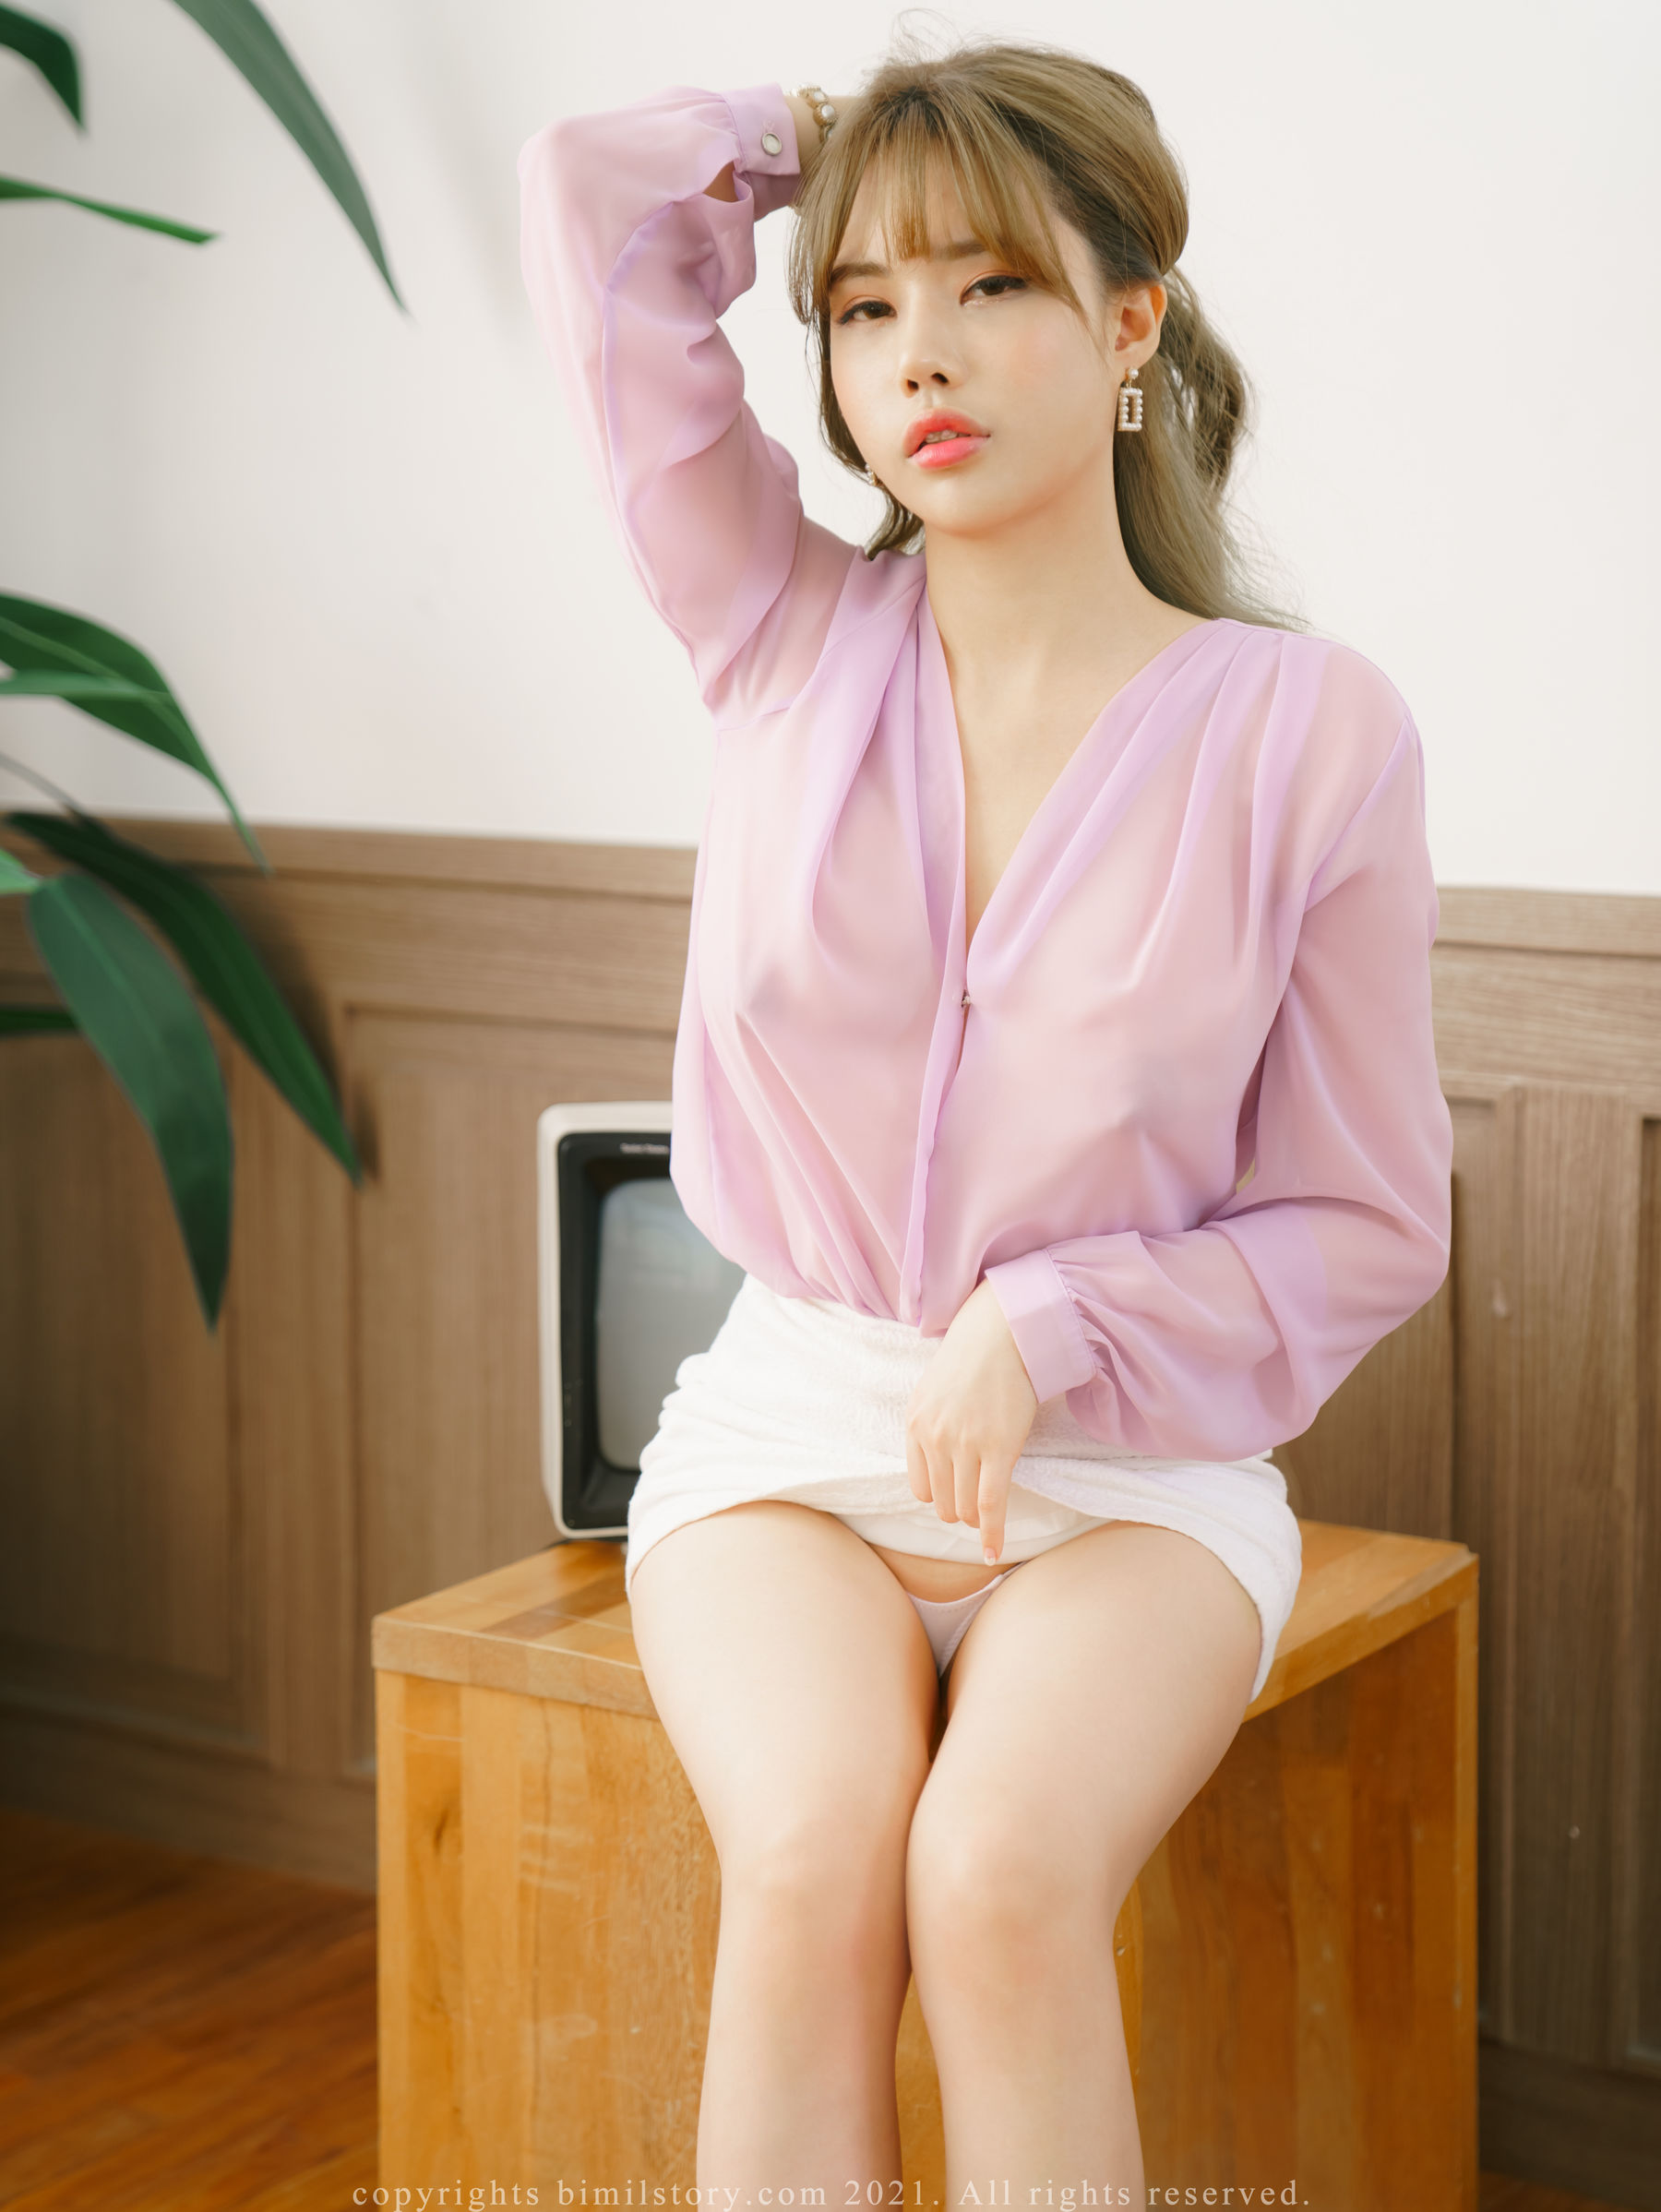 [Bimilstory] Eunha 2023.04.04 Vol.04 How to dress in case of F cup size woman  第6张